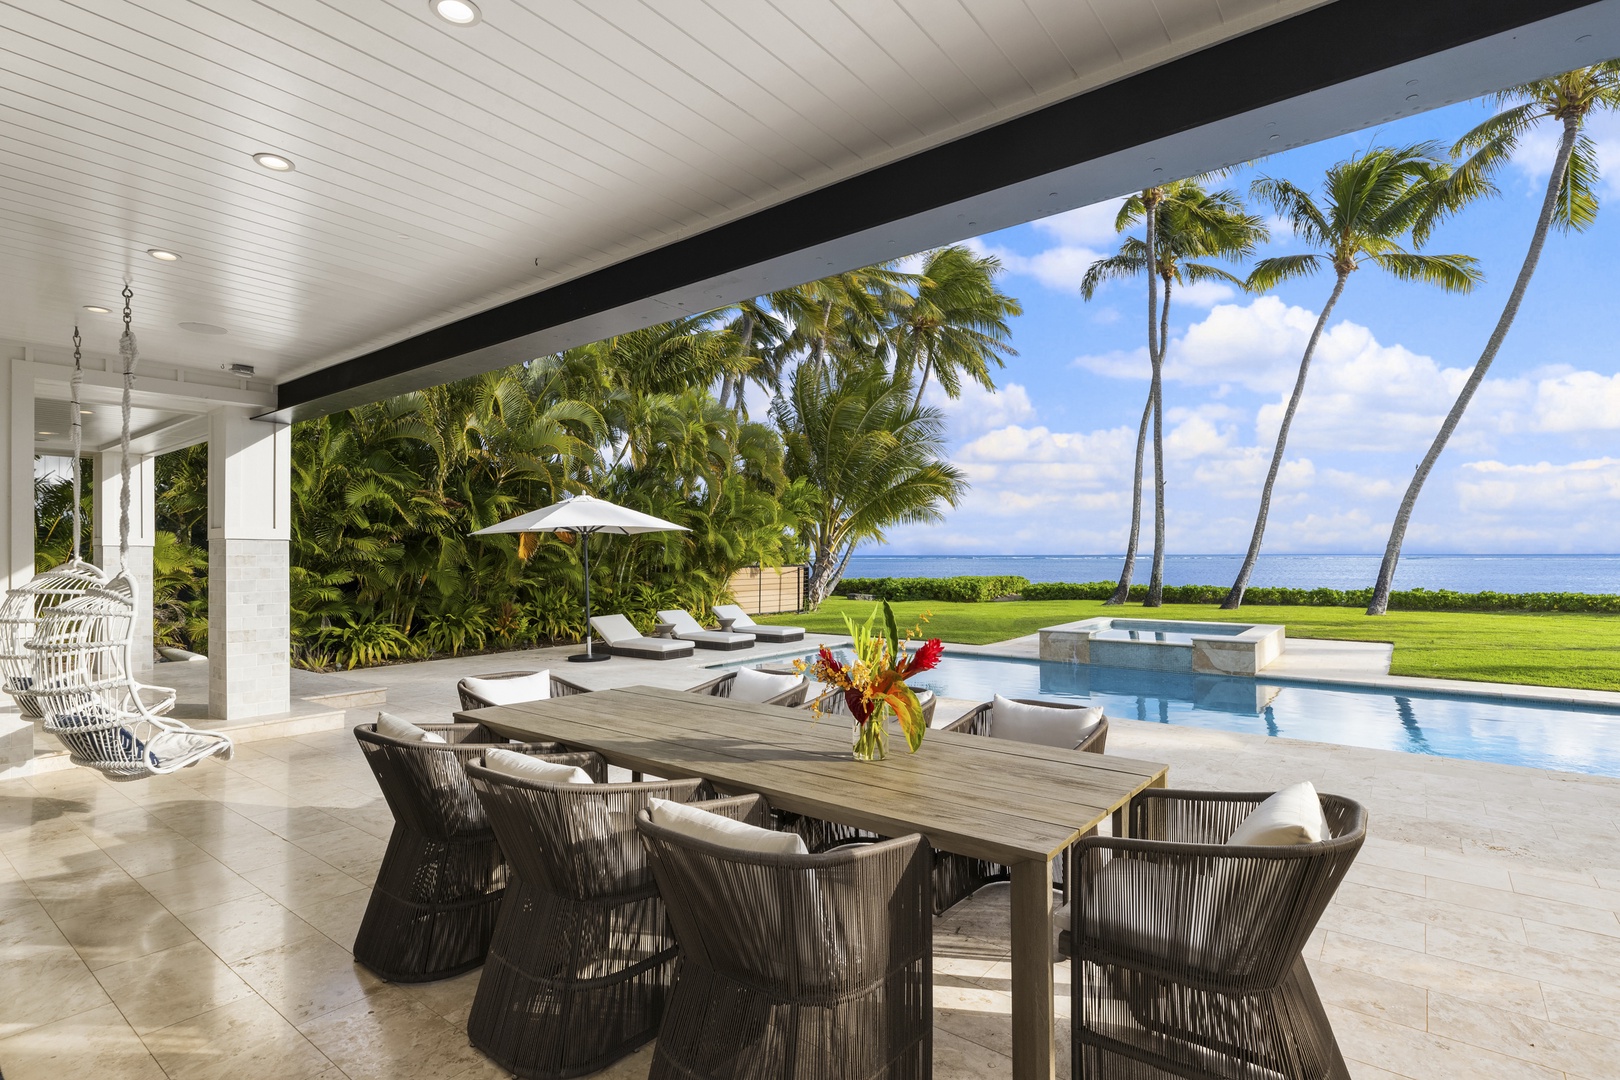 Honolulu Vacation Rentals, Niu Beach Estate - Step out to the enormous lanai to witness the tranquil seaside swimming pool and spa, decorated with chaise lounge chairs and beach umbrellas amidst the manicured tropical flora for relaxing and refreshing fun under the Hawaiian sun